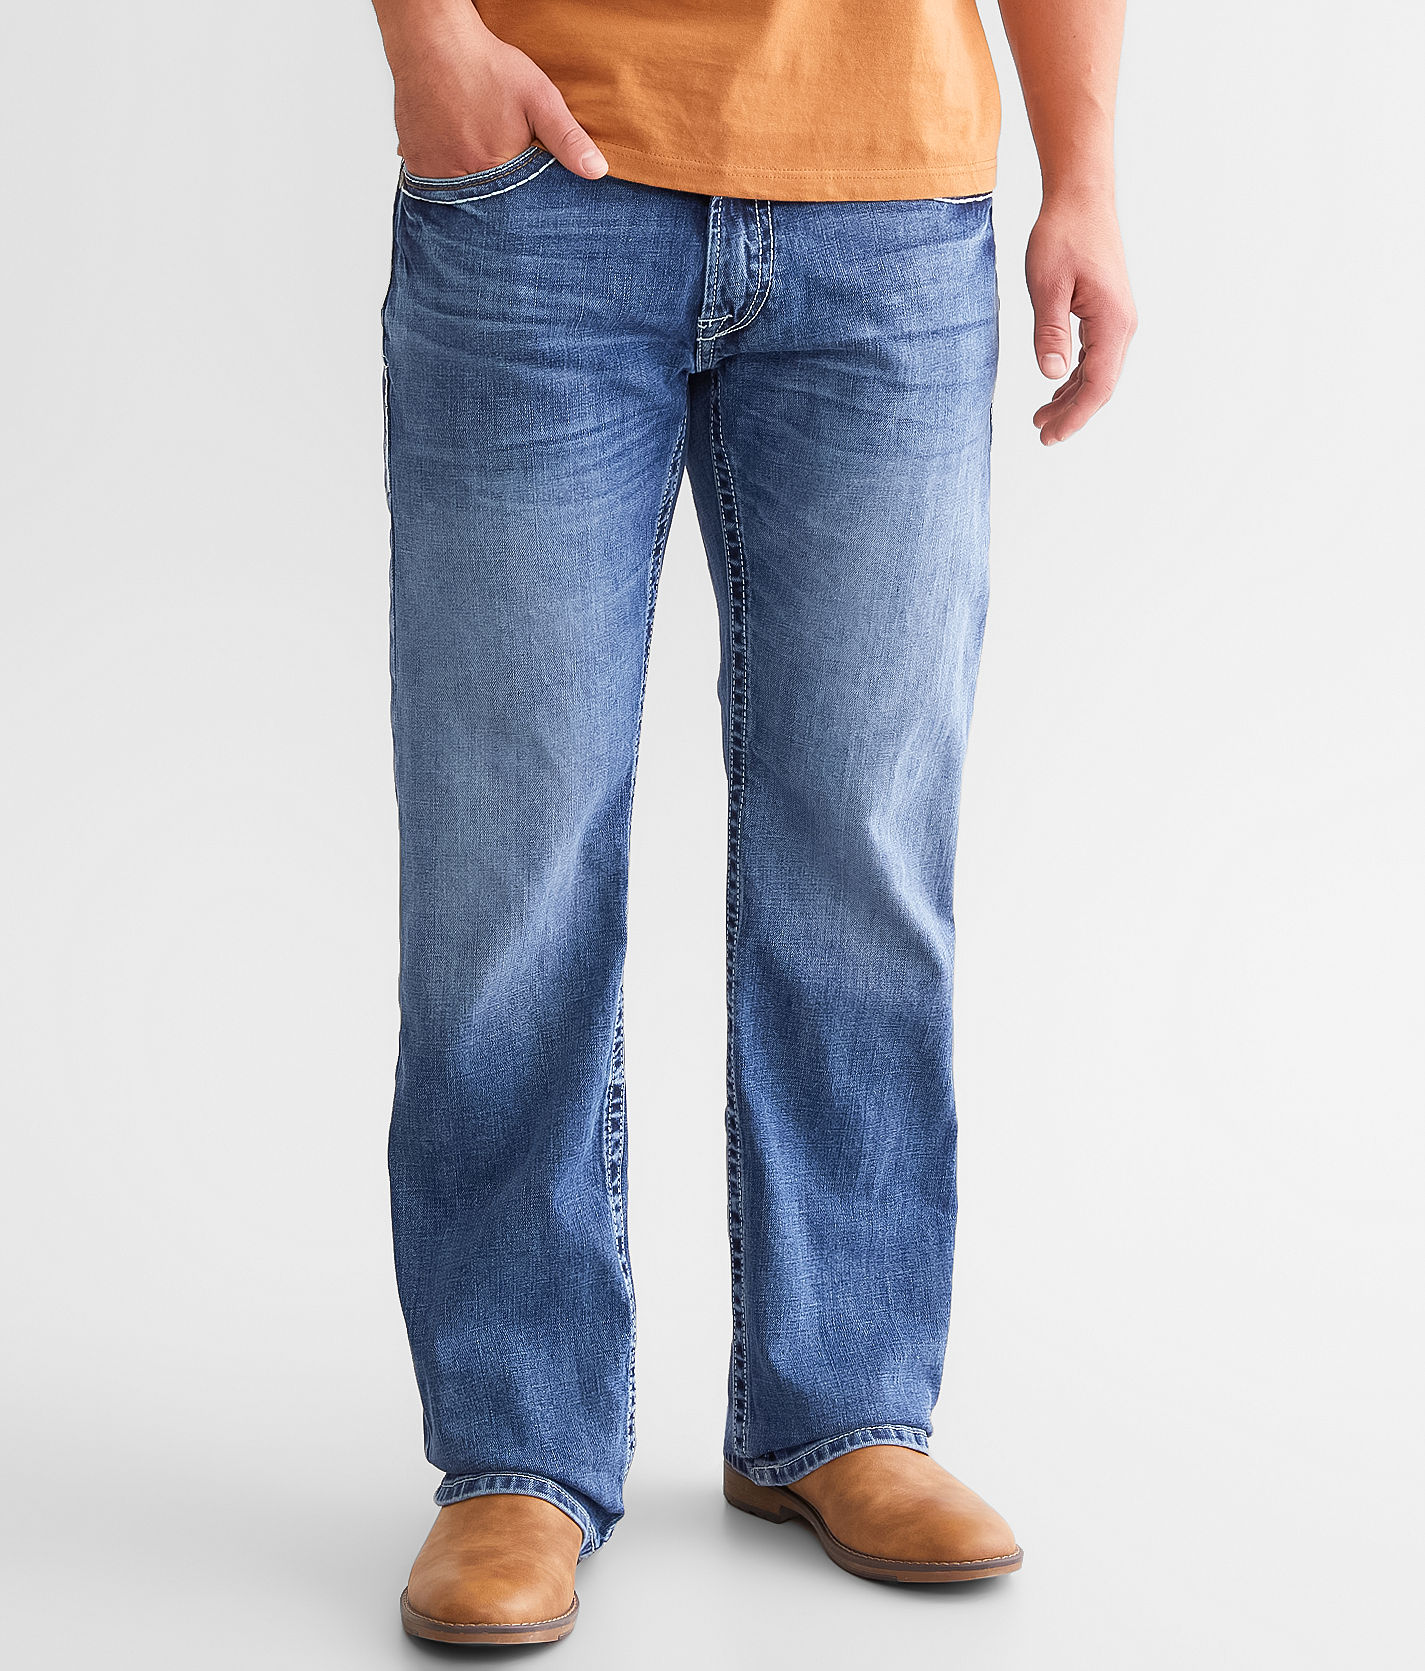 Men's Ariat M5 Marston Straight Jeans - The Boot Store